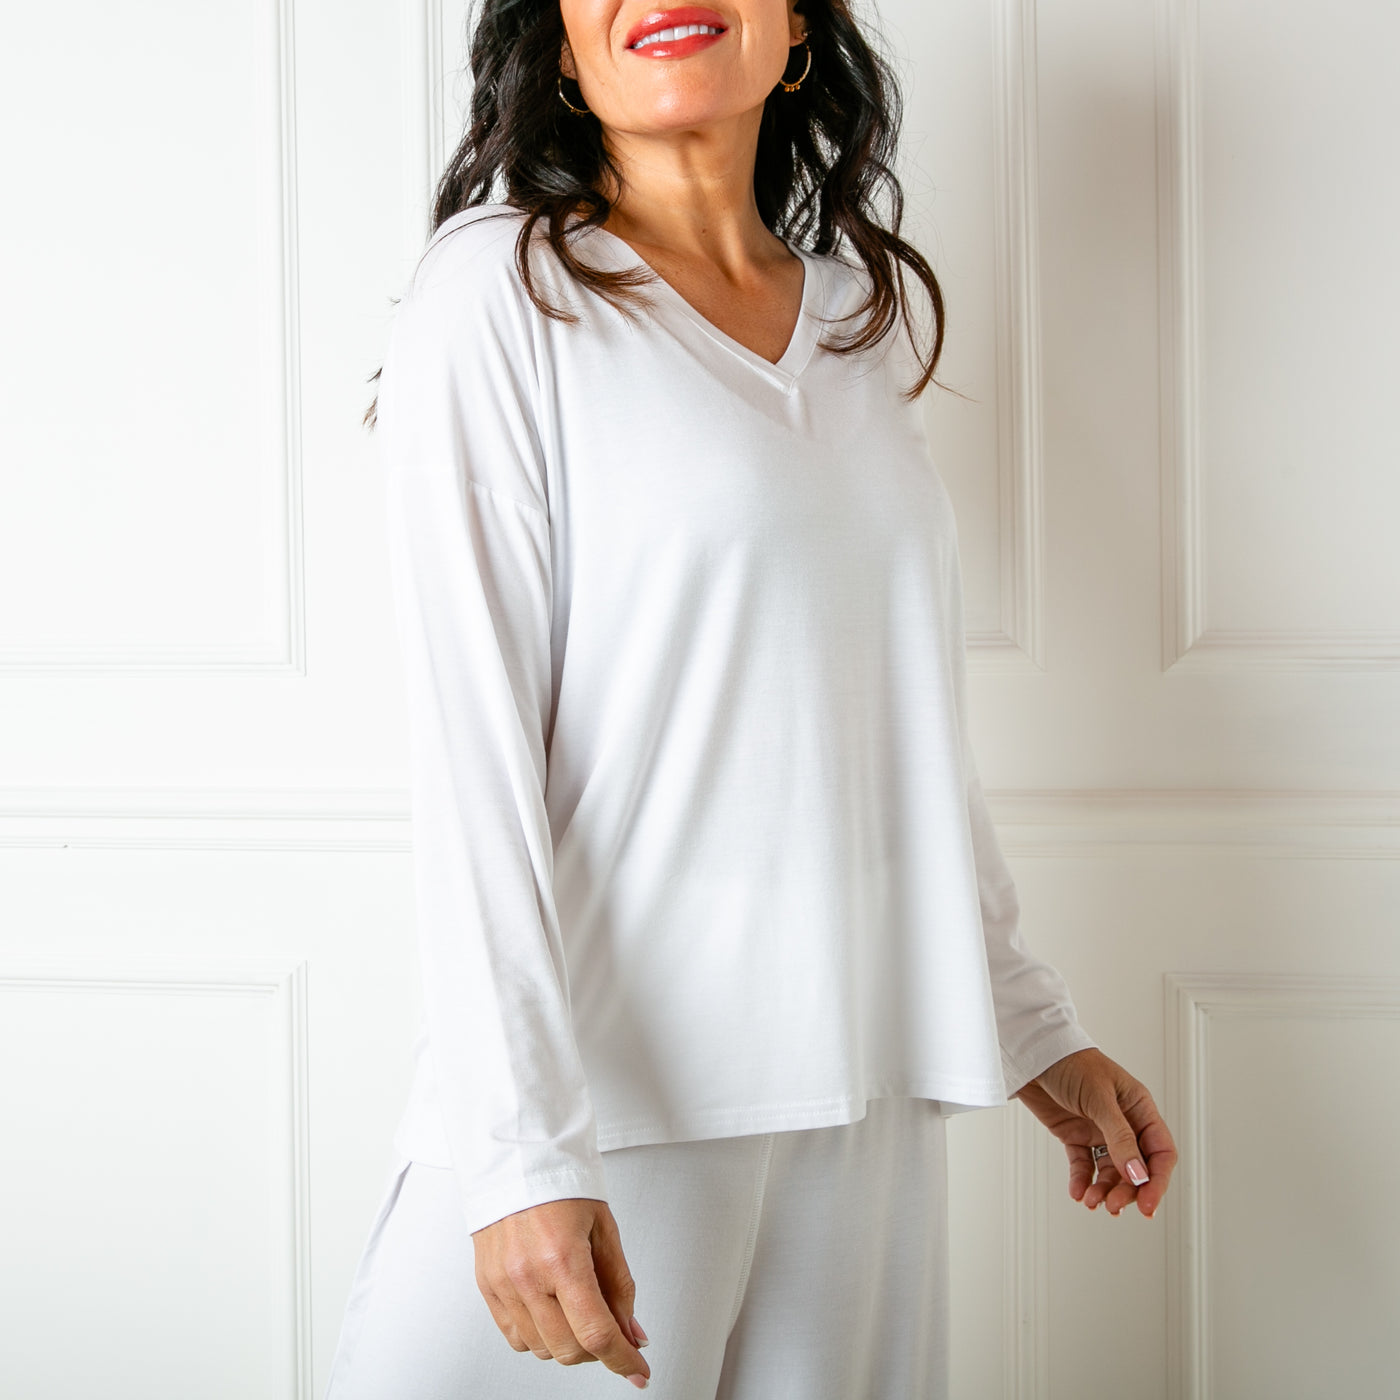 The white Bamboo Long Sleeve Top made from a super soft and stretchy material for maximum comfort